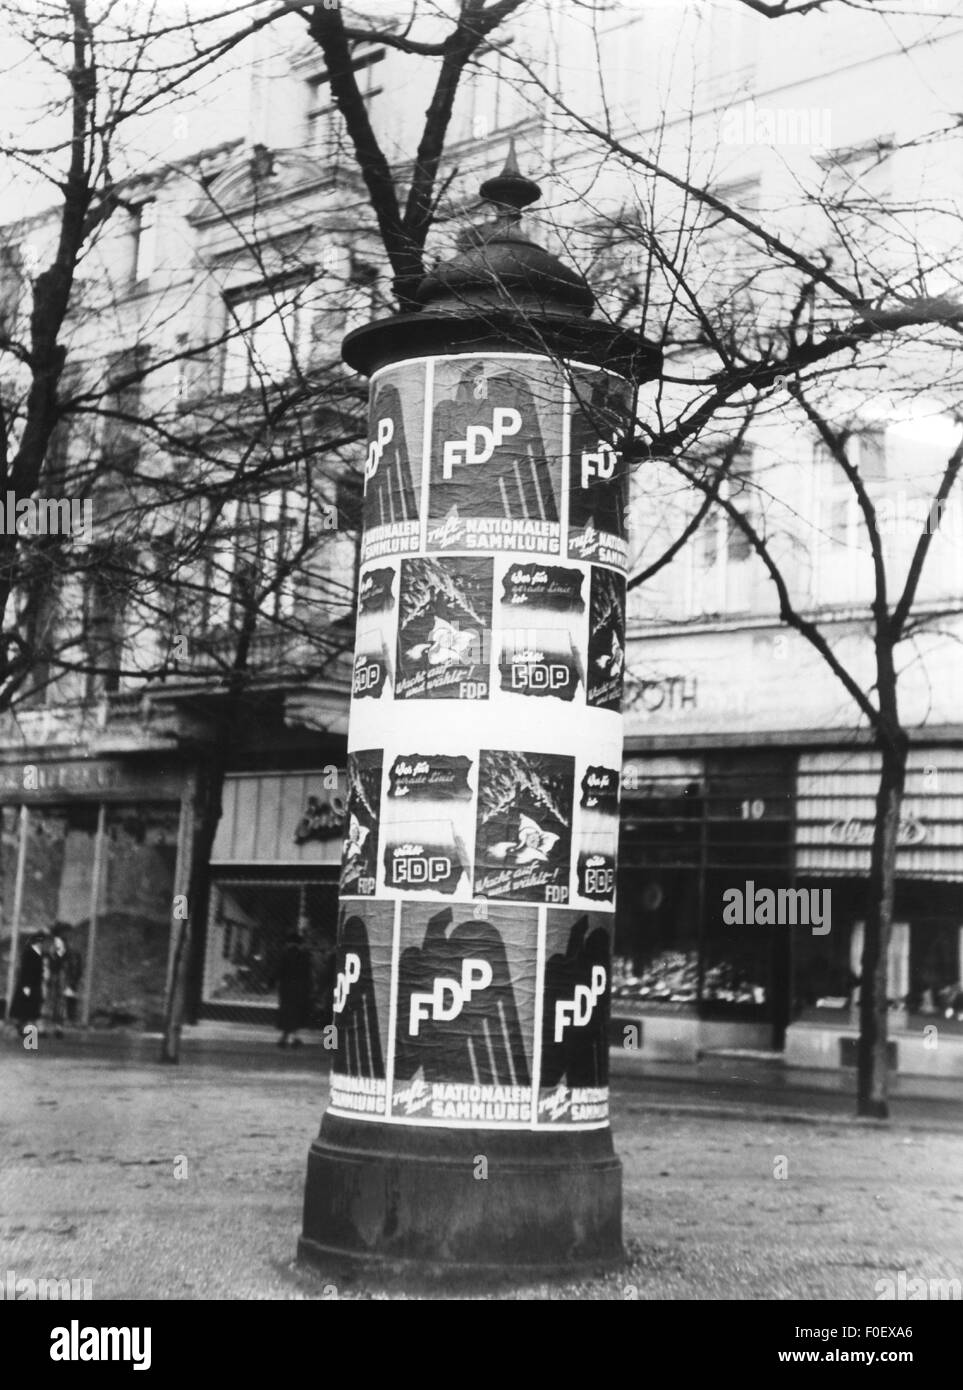 politics, political parties, Liberal Democratic Party (FDP), advertising pillar with election poster of the FDP, state election, Germany, 1954, Additional-Rights-Clearences-Not Available Stock Photo